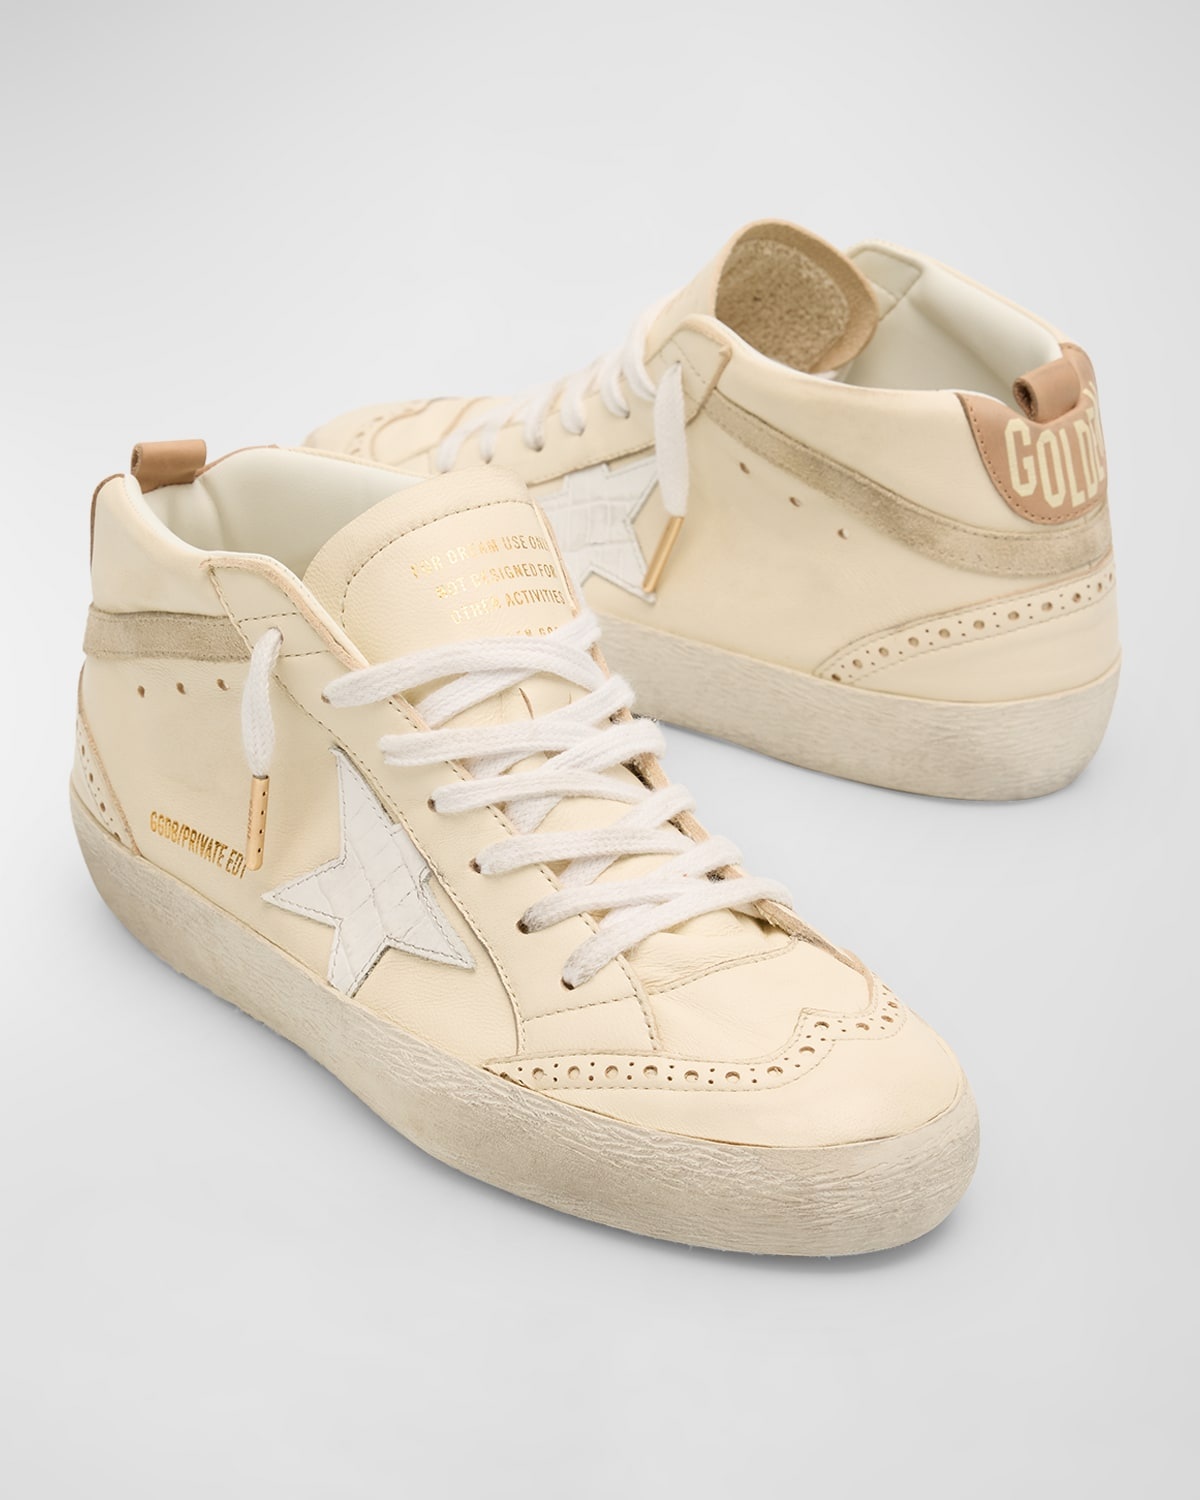 Midstar Mixed Leather Mid-Top Sneakers - 8